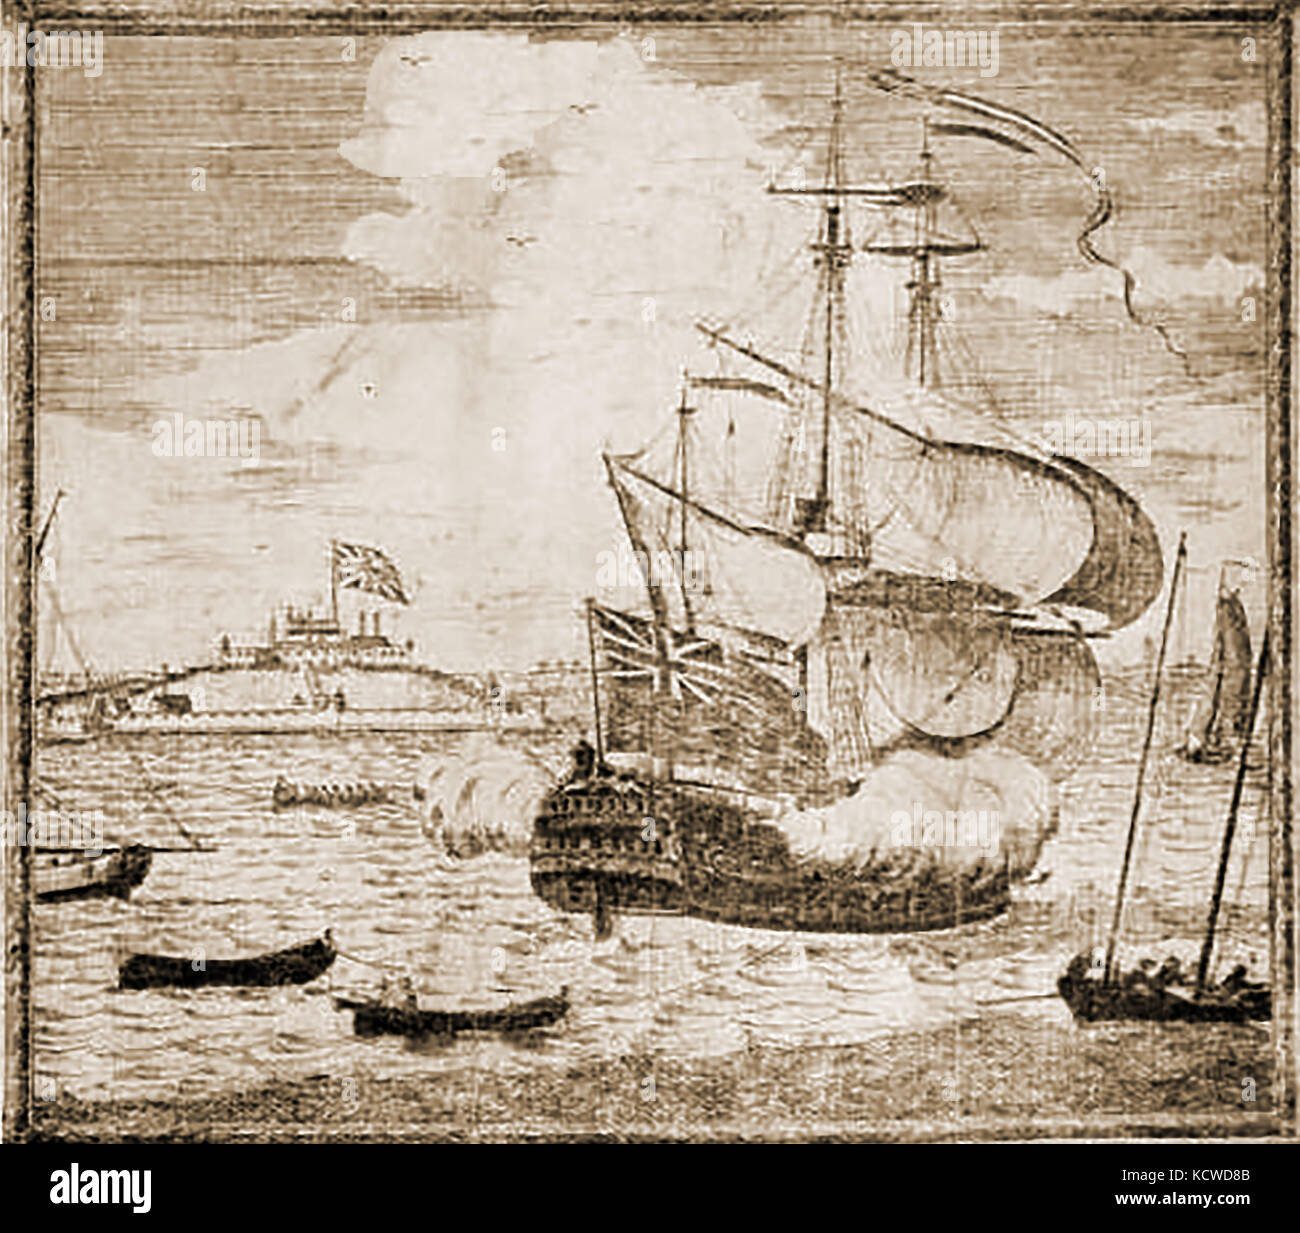 A view of Castle William, Boston Harbour USA 1729 with a sailing ship of the time in the foreground Stock Photo